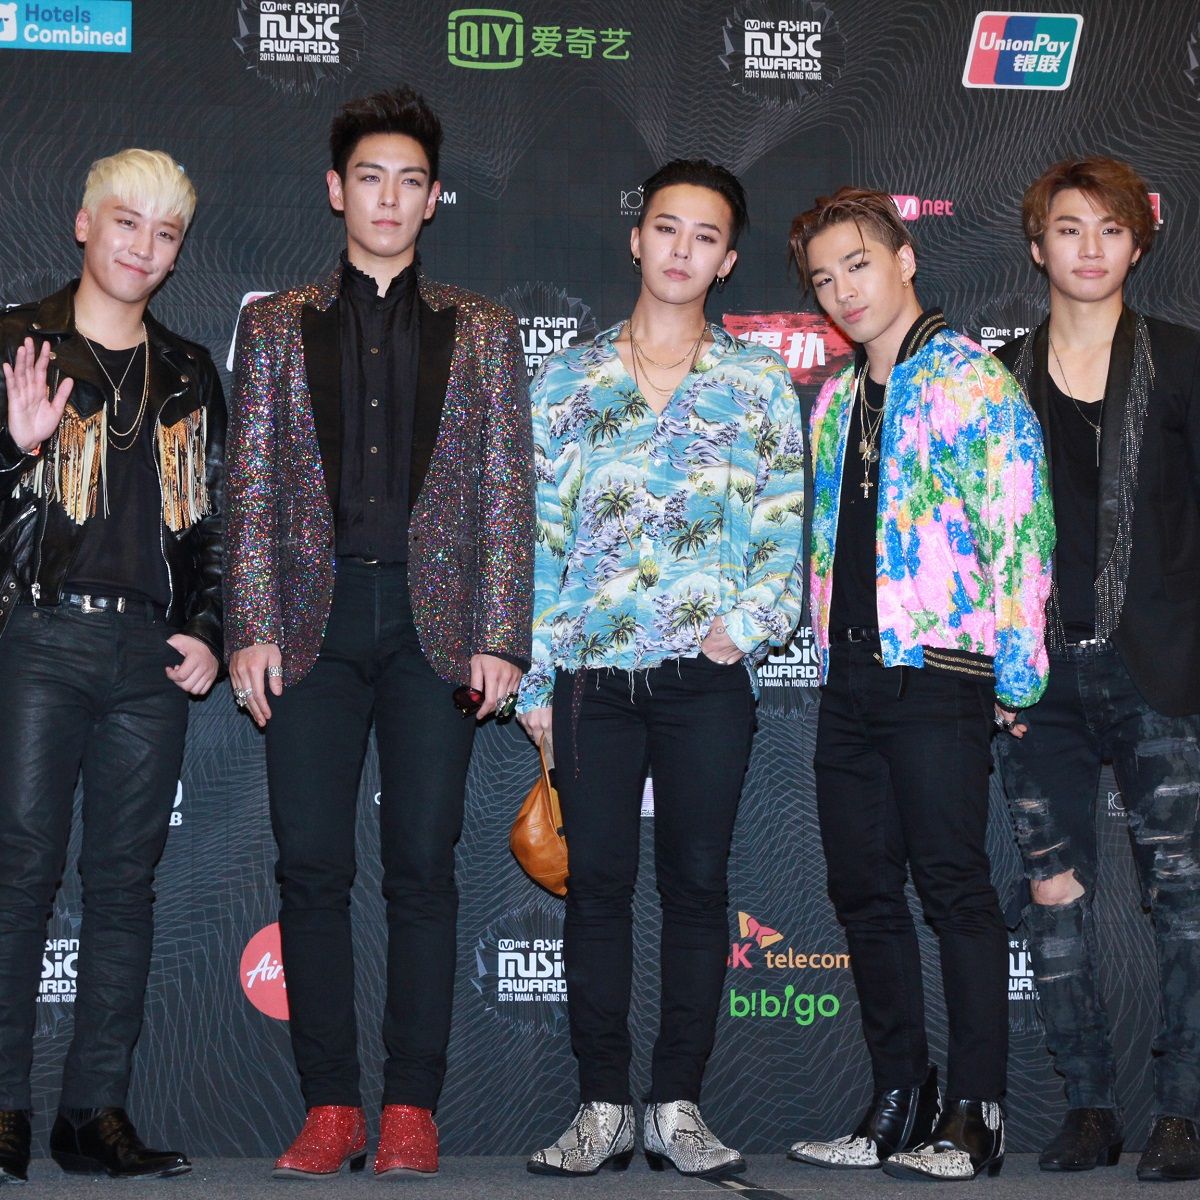 BIGBANG announces comeback, will release first song in four years